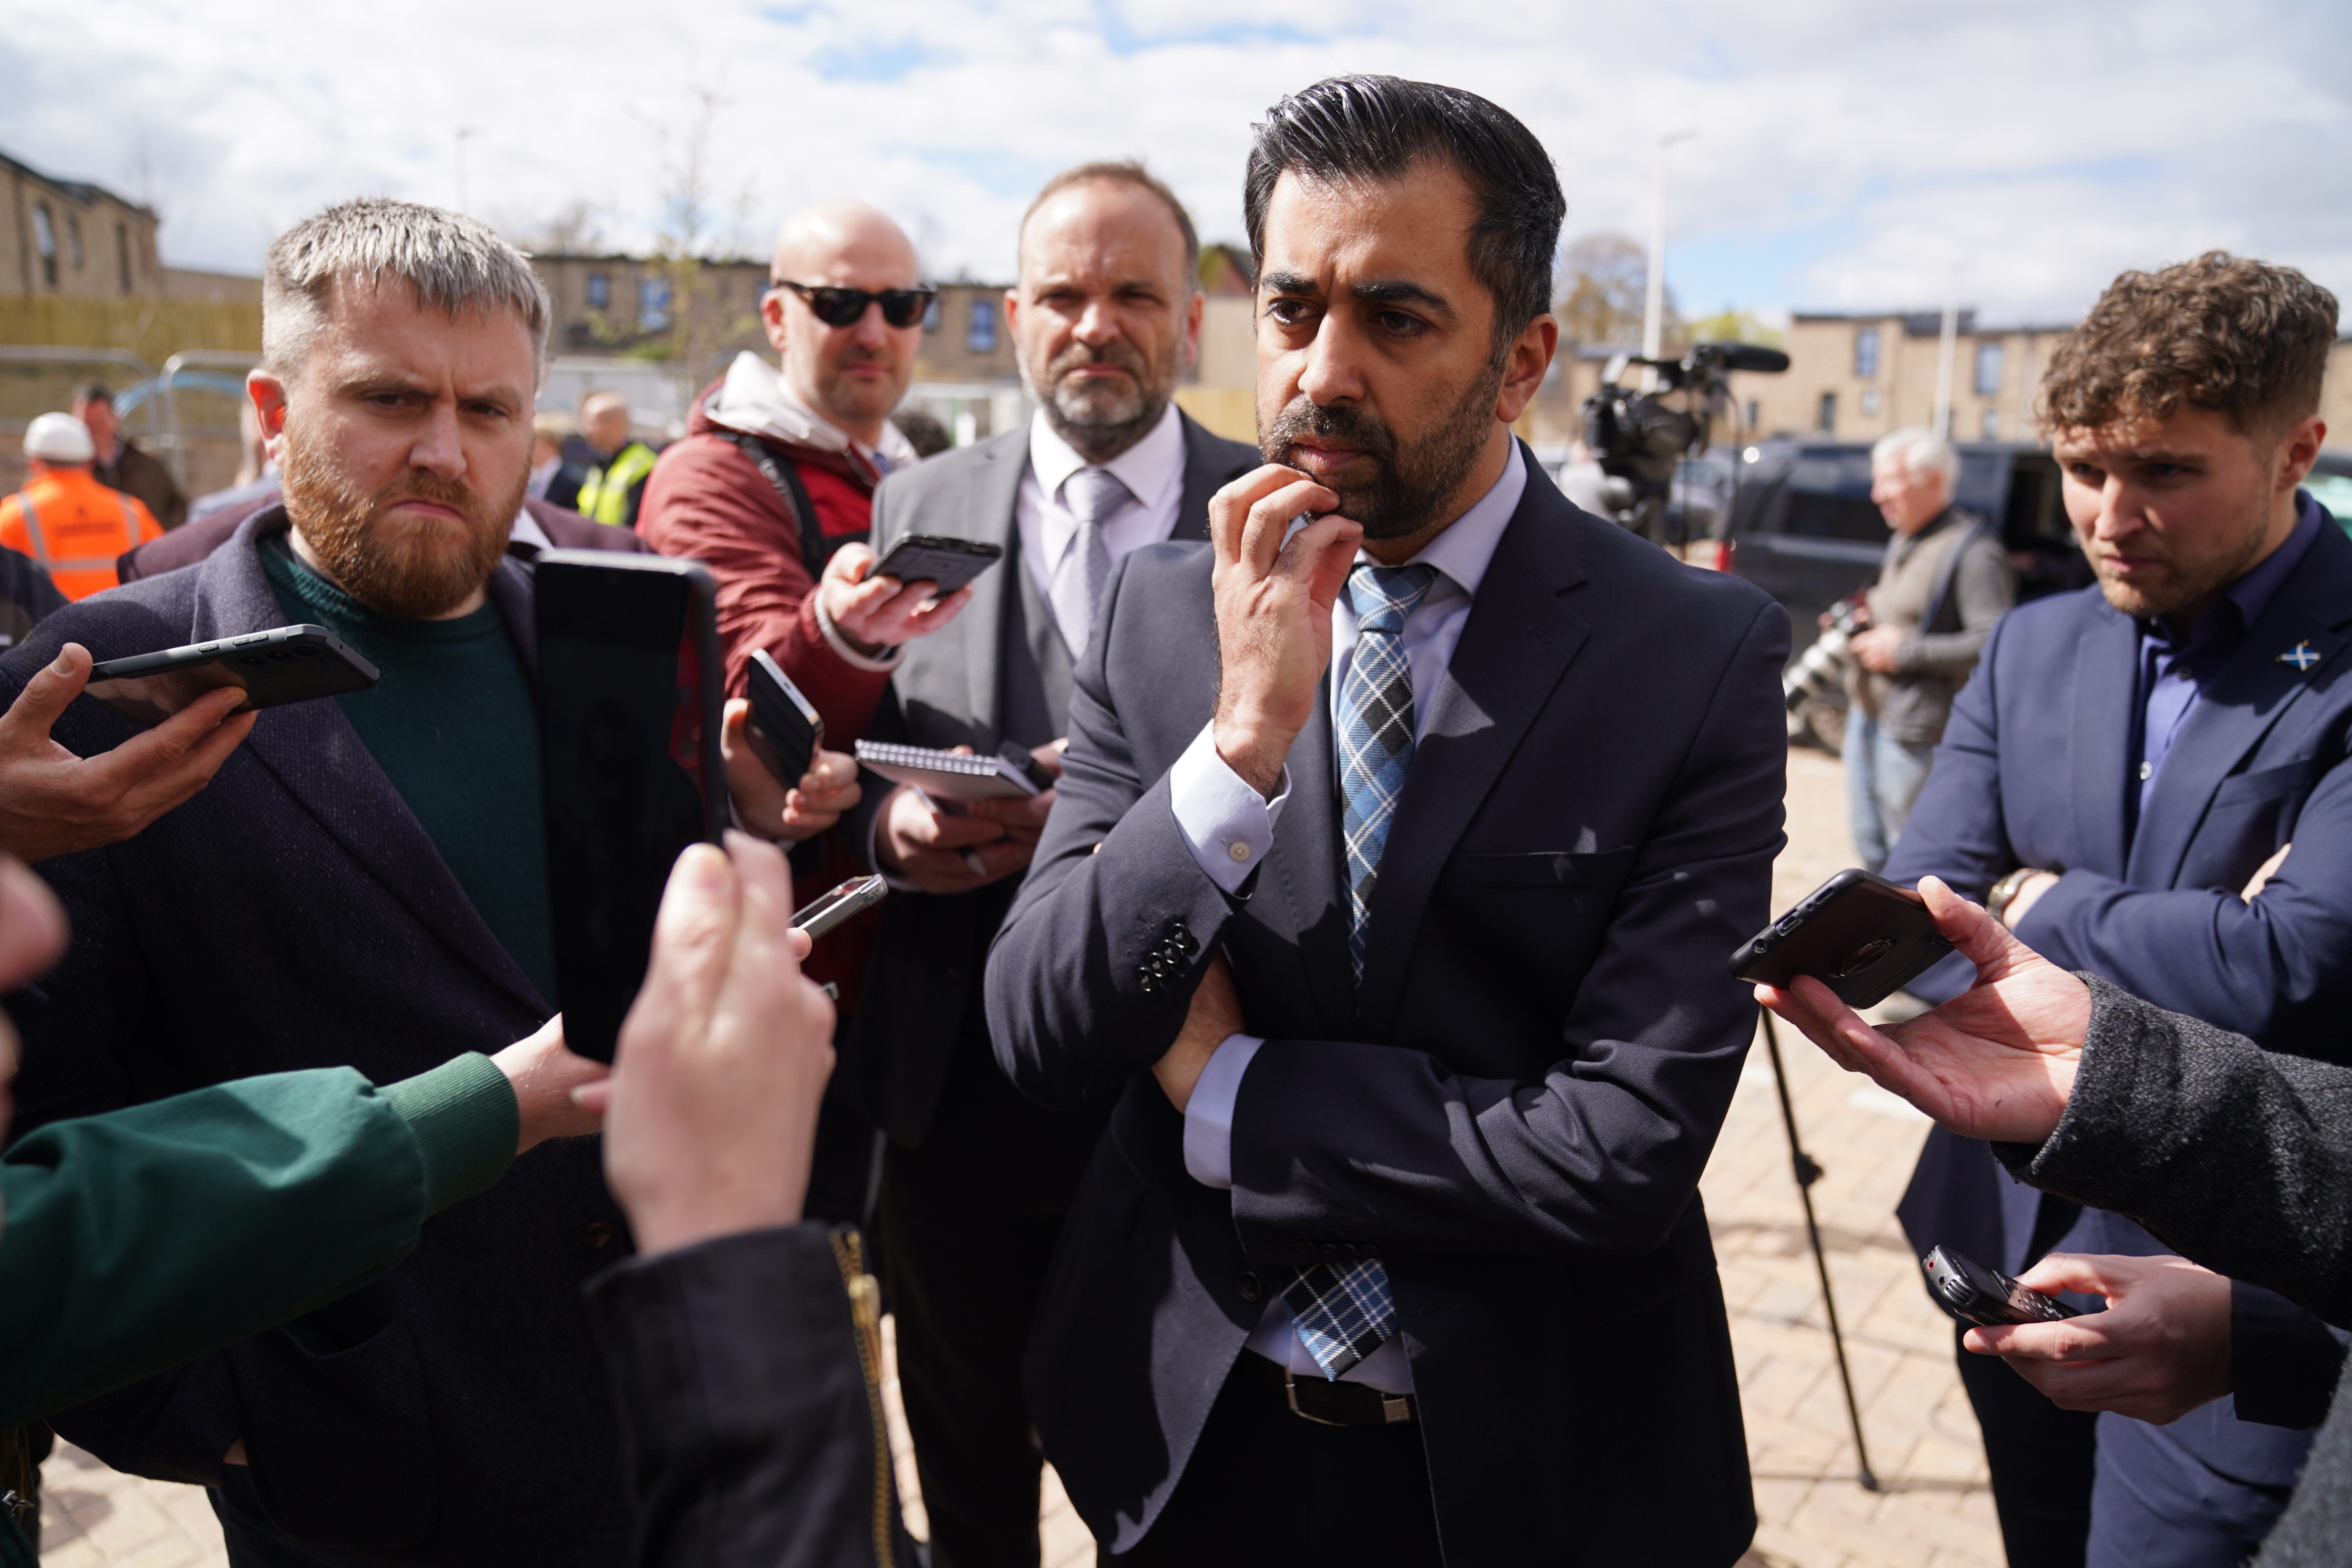 Humza Yousaf spoke to the media during a visit to a housing site in Dundee on Friday